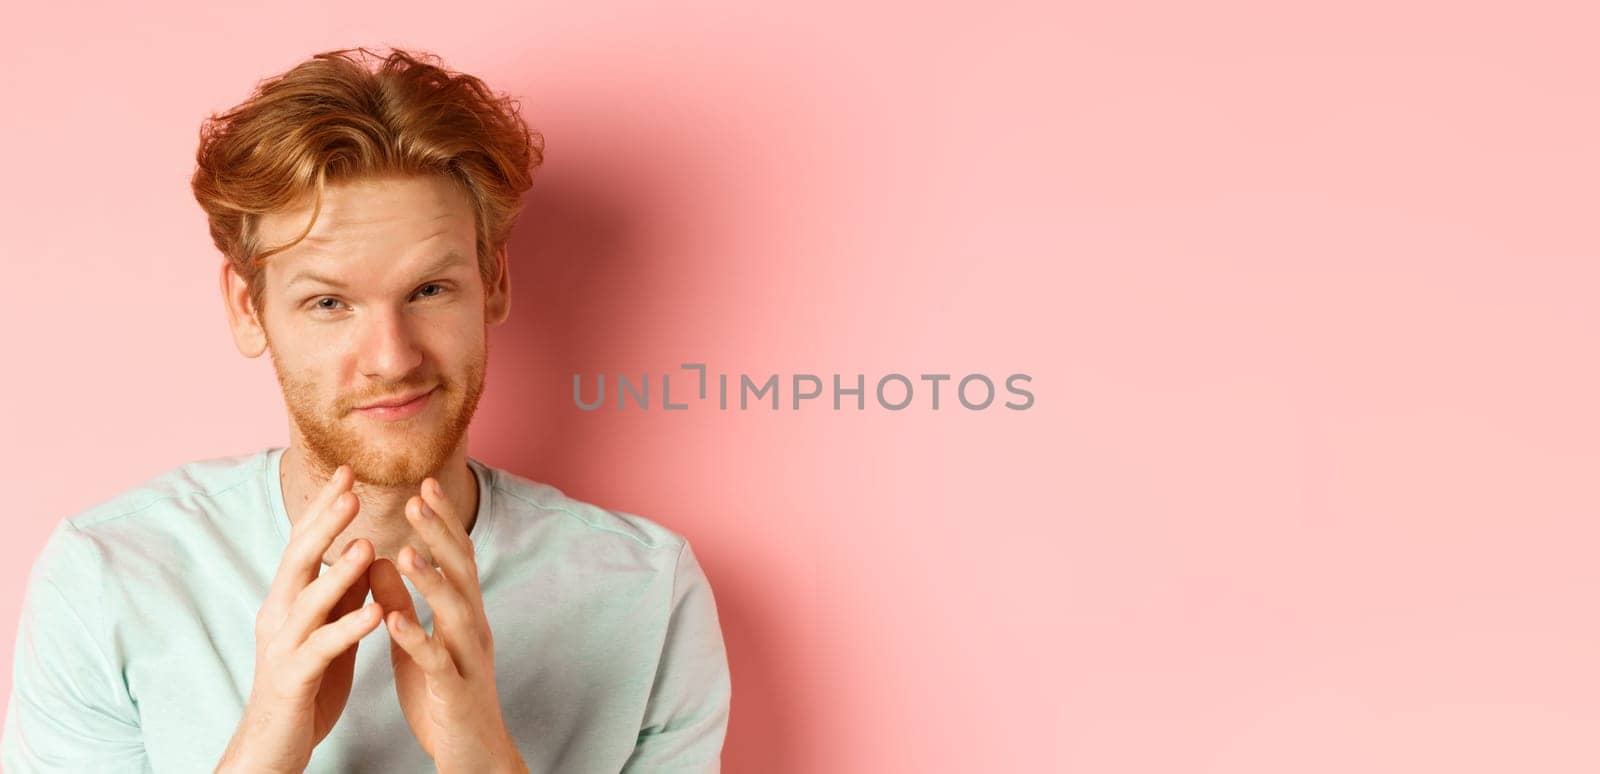 Close up of funny bearded man with red hair pitching a perfect plan, smiling and steeple fingers, scheming something, standing devious against pink background.